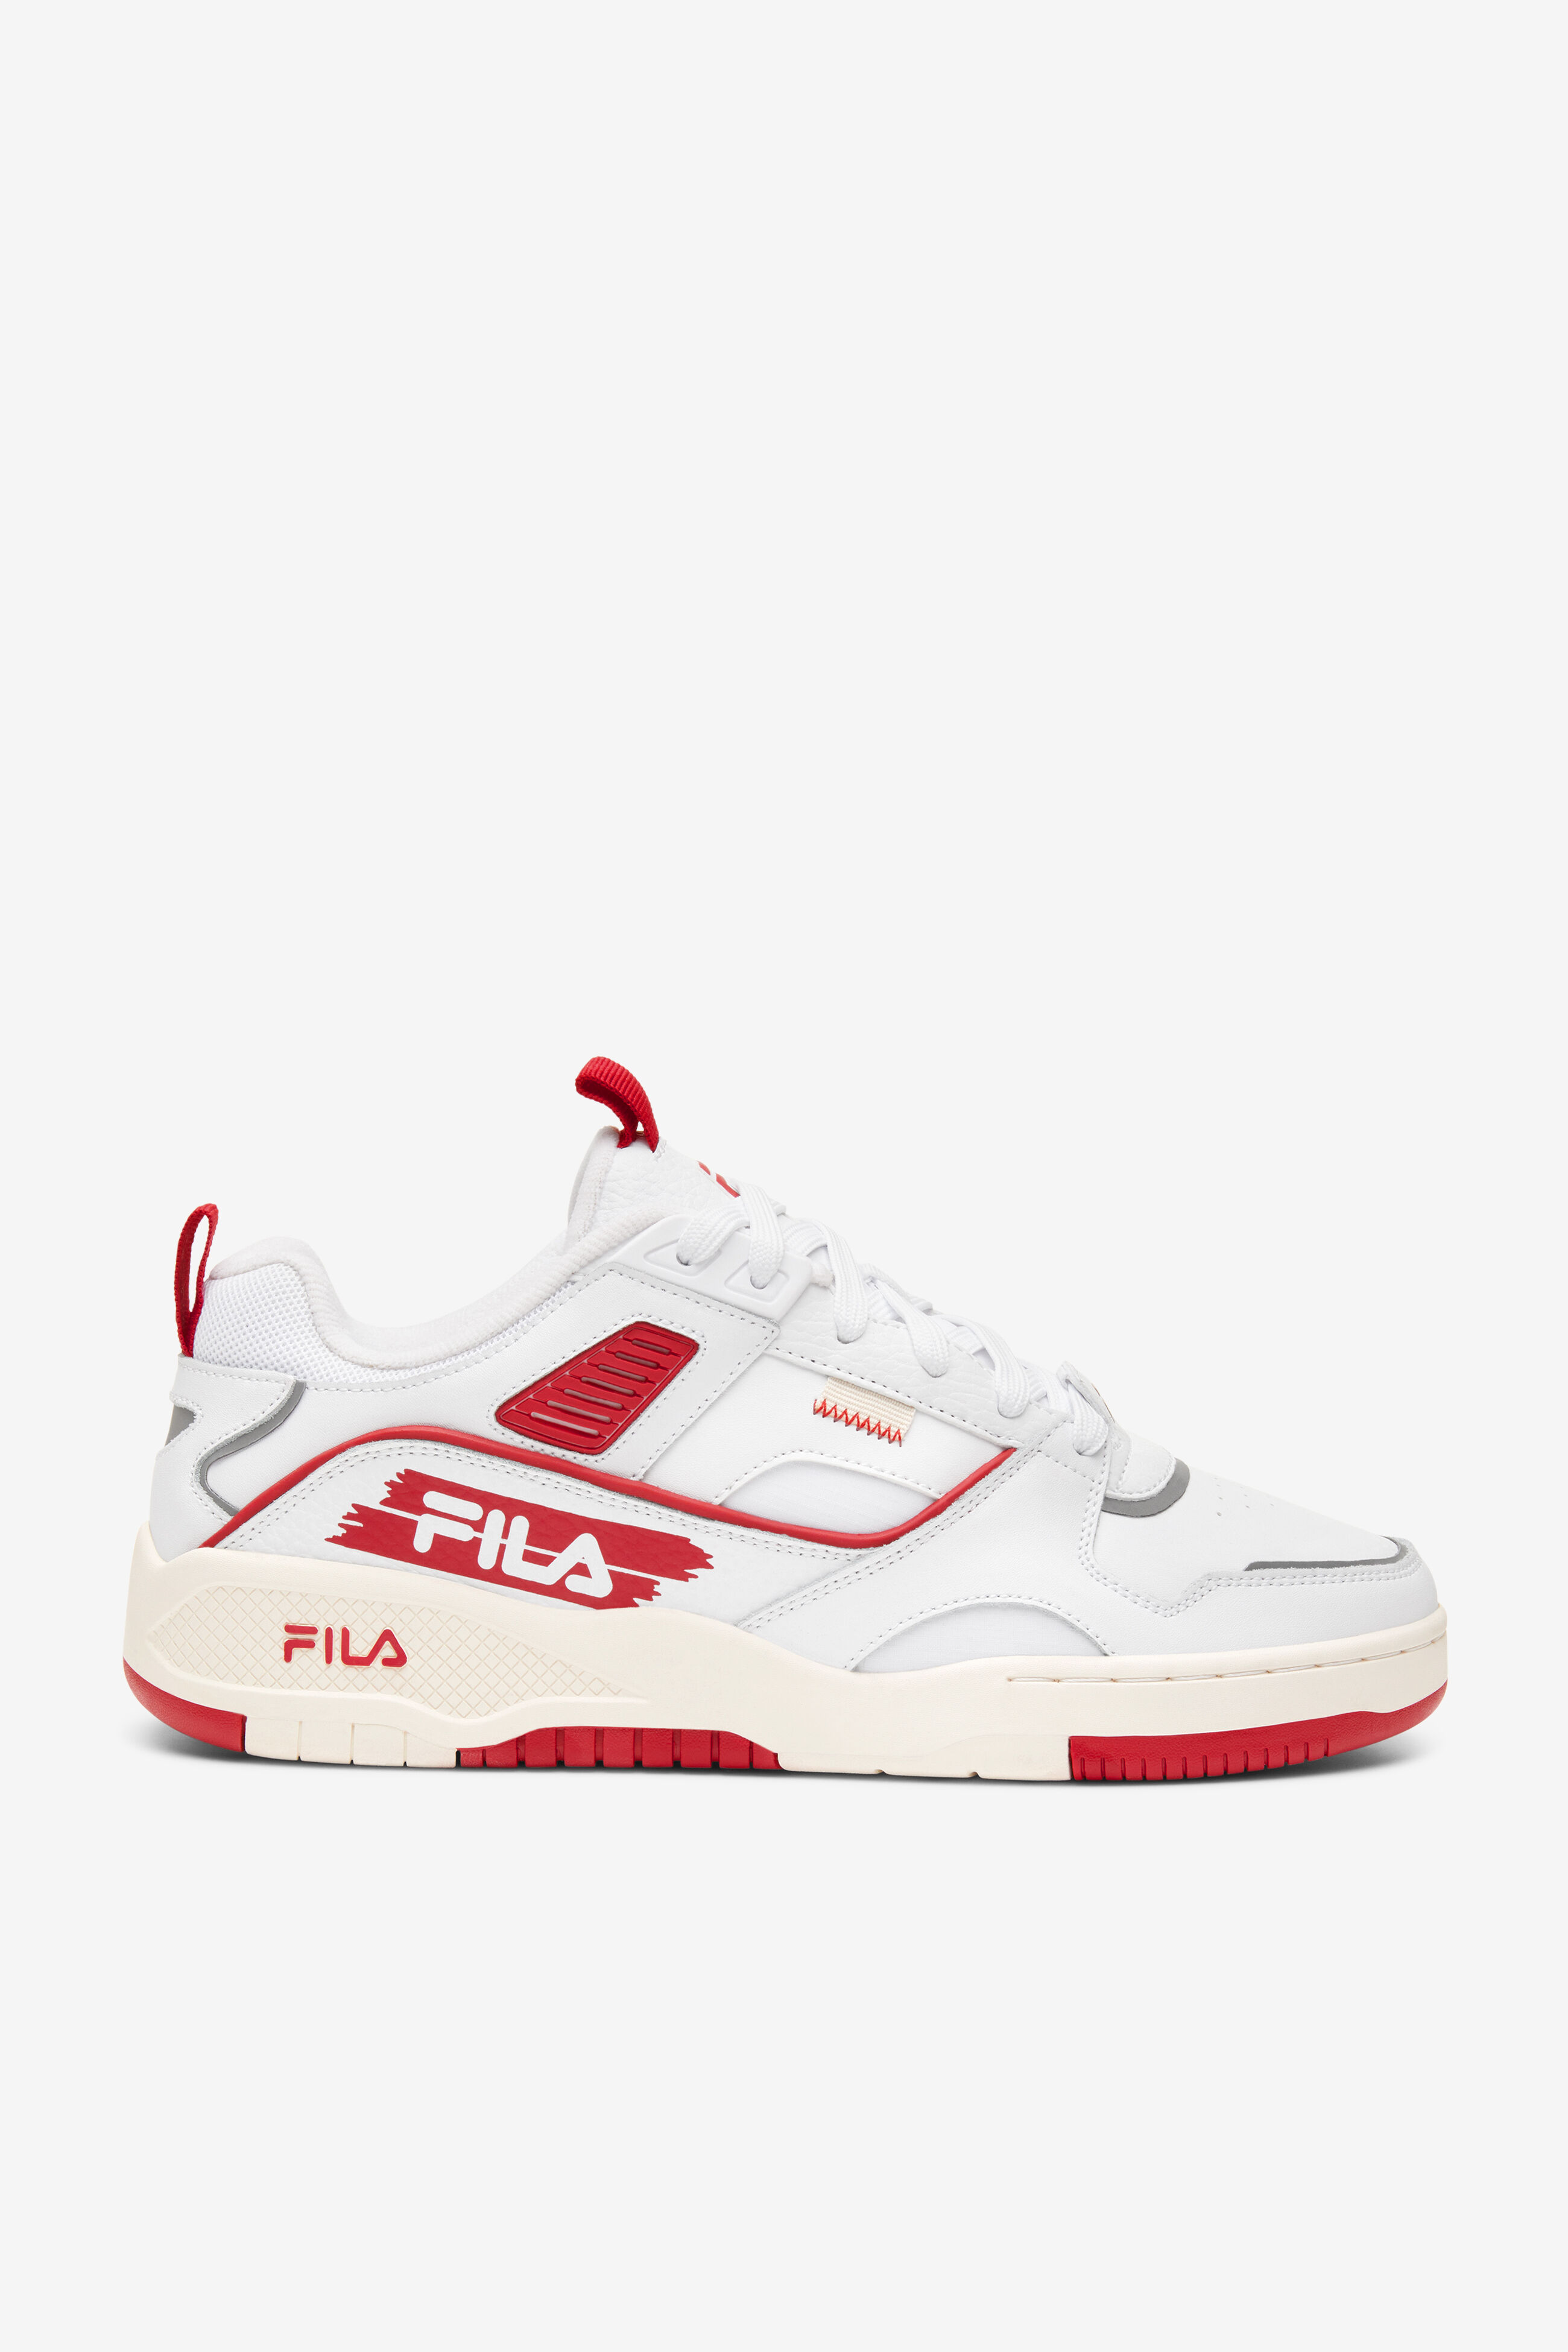 Fila Double Bounce 3 Wh/Ny/Rd Men's Pickleball Shoes | Total Pickleball